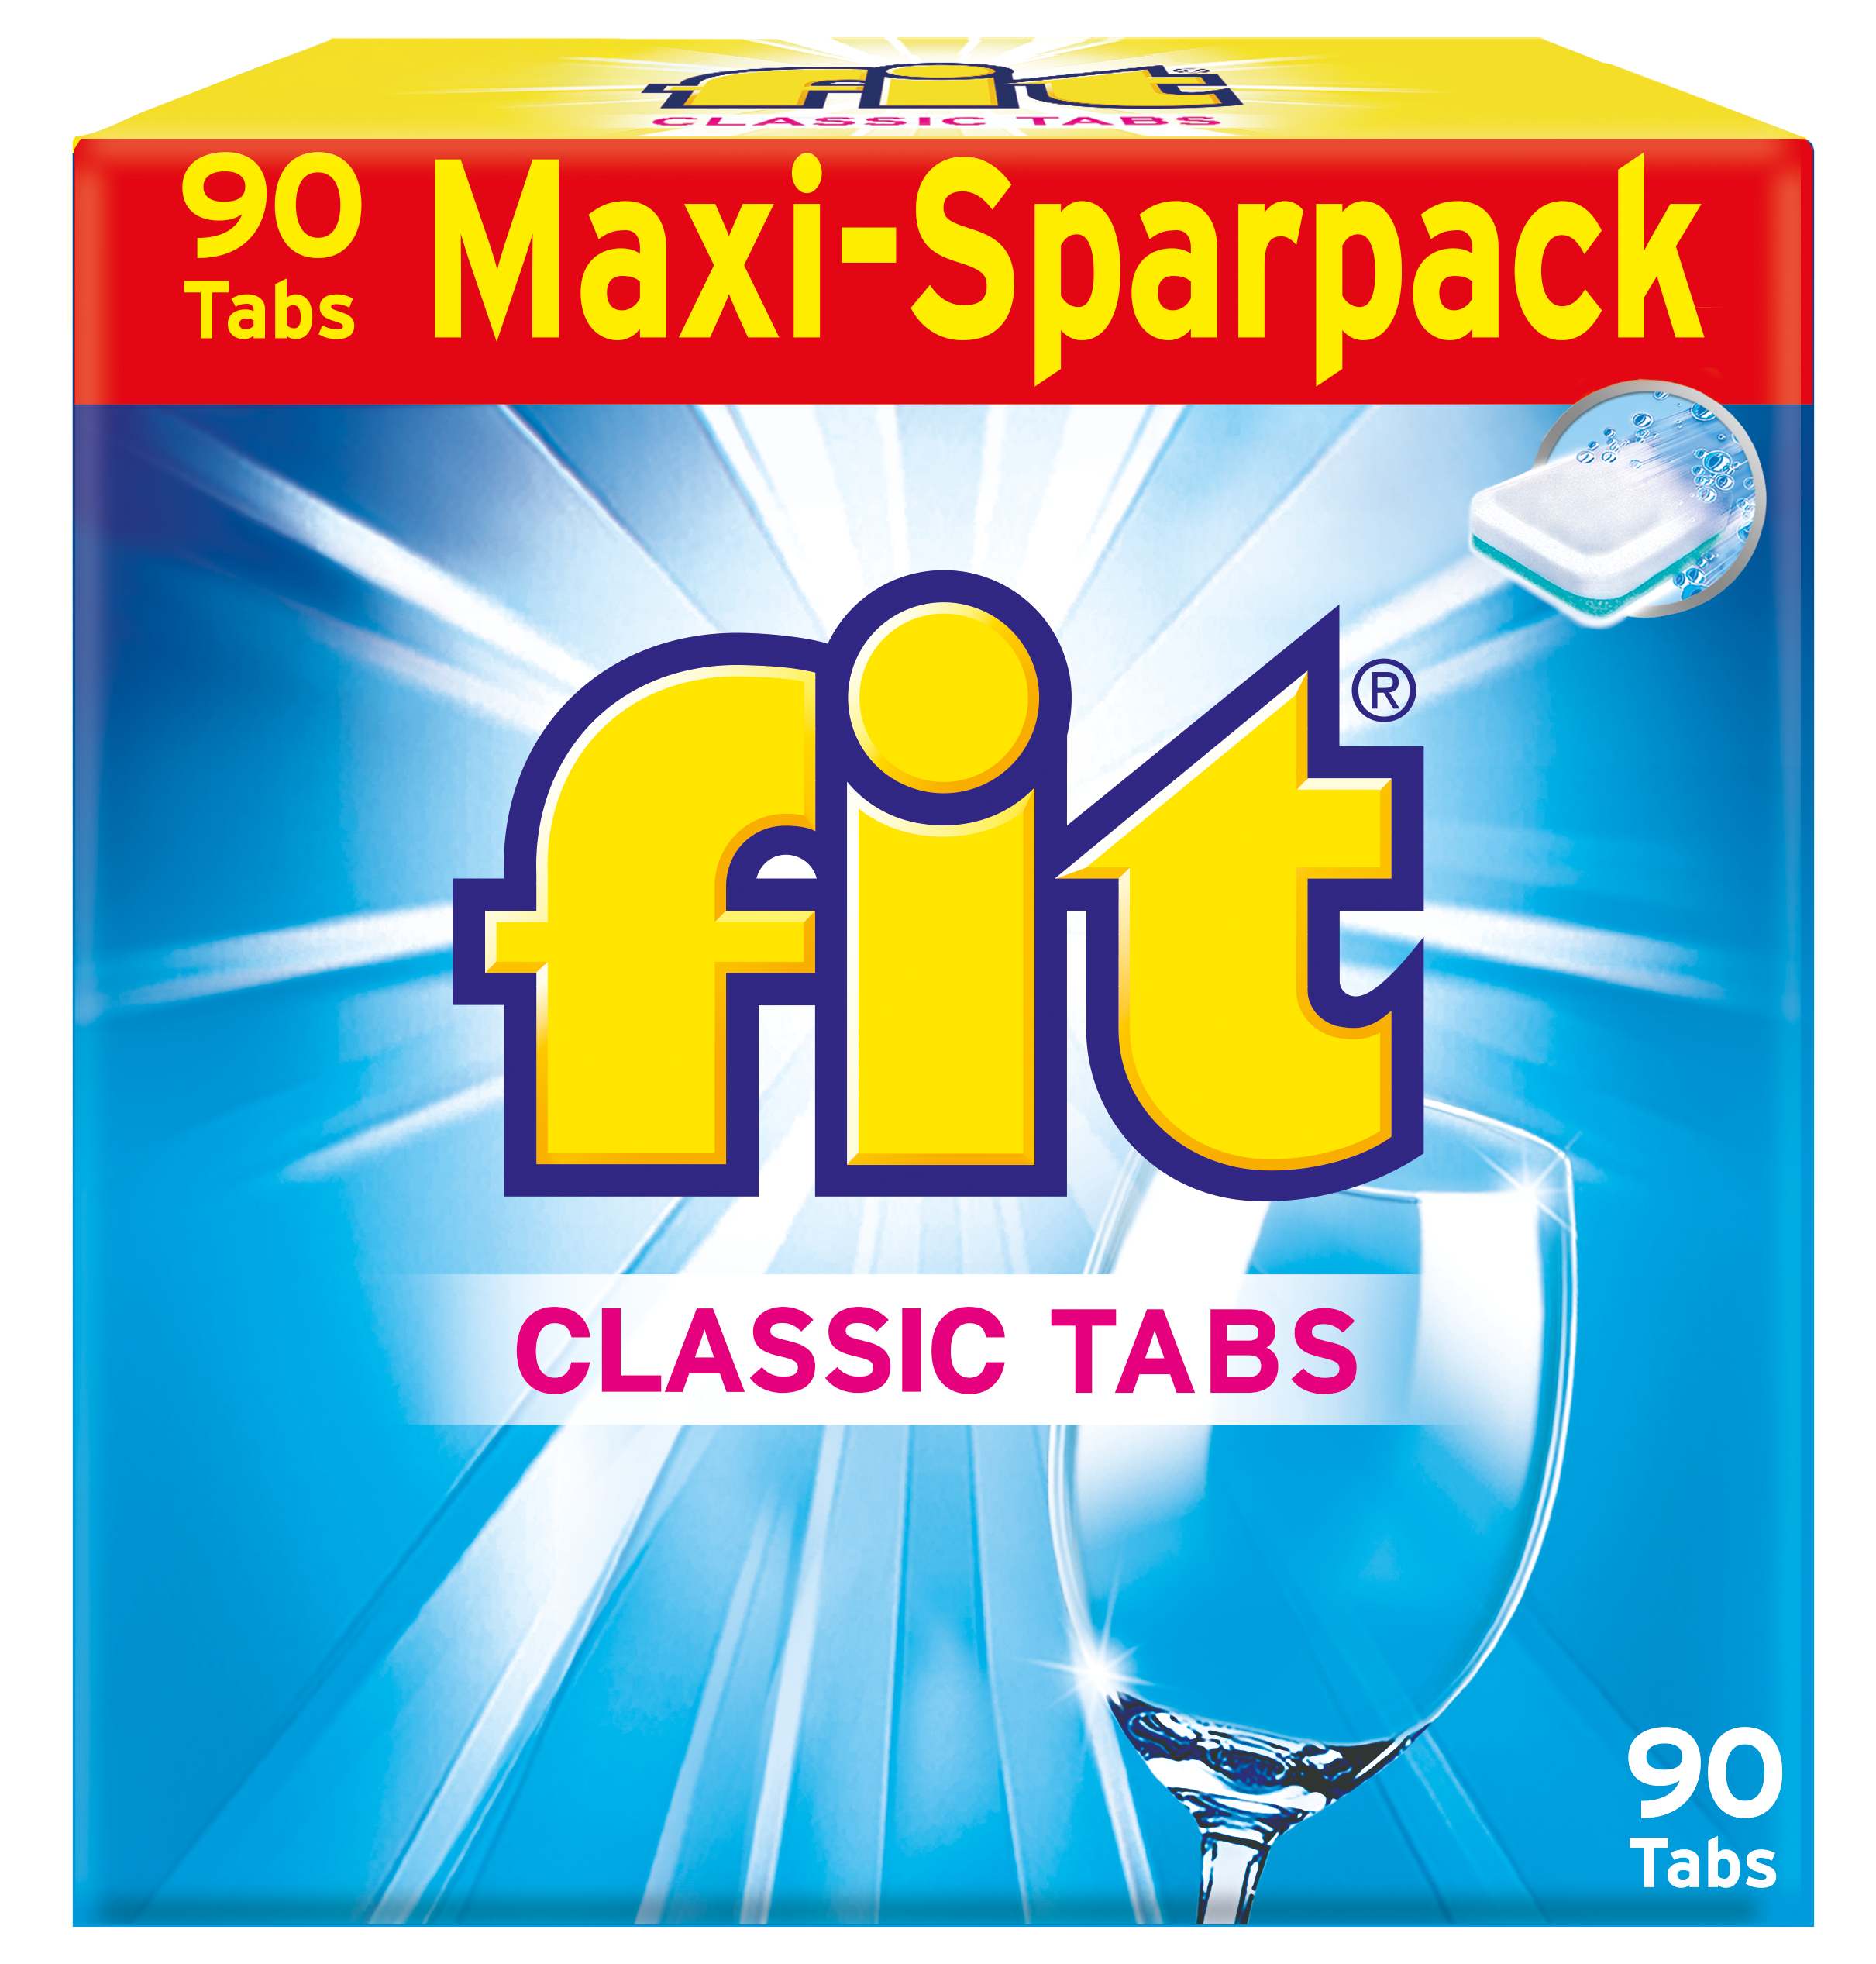 fit Classic Tabs